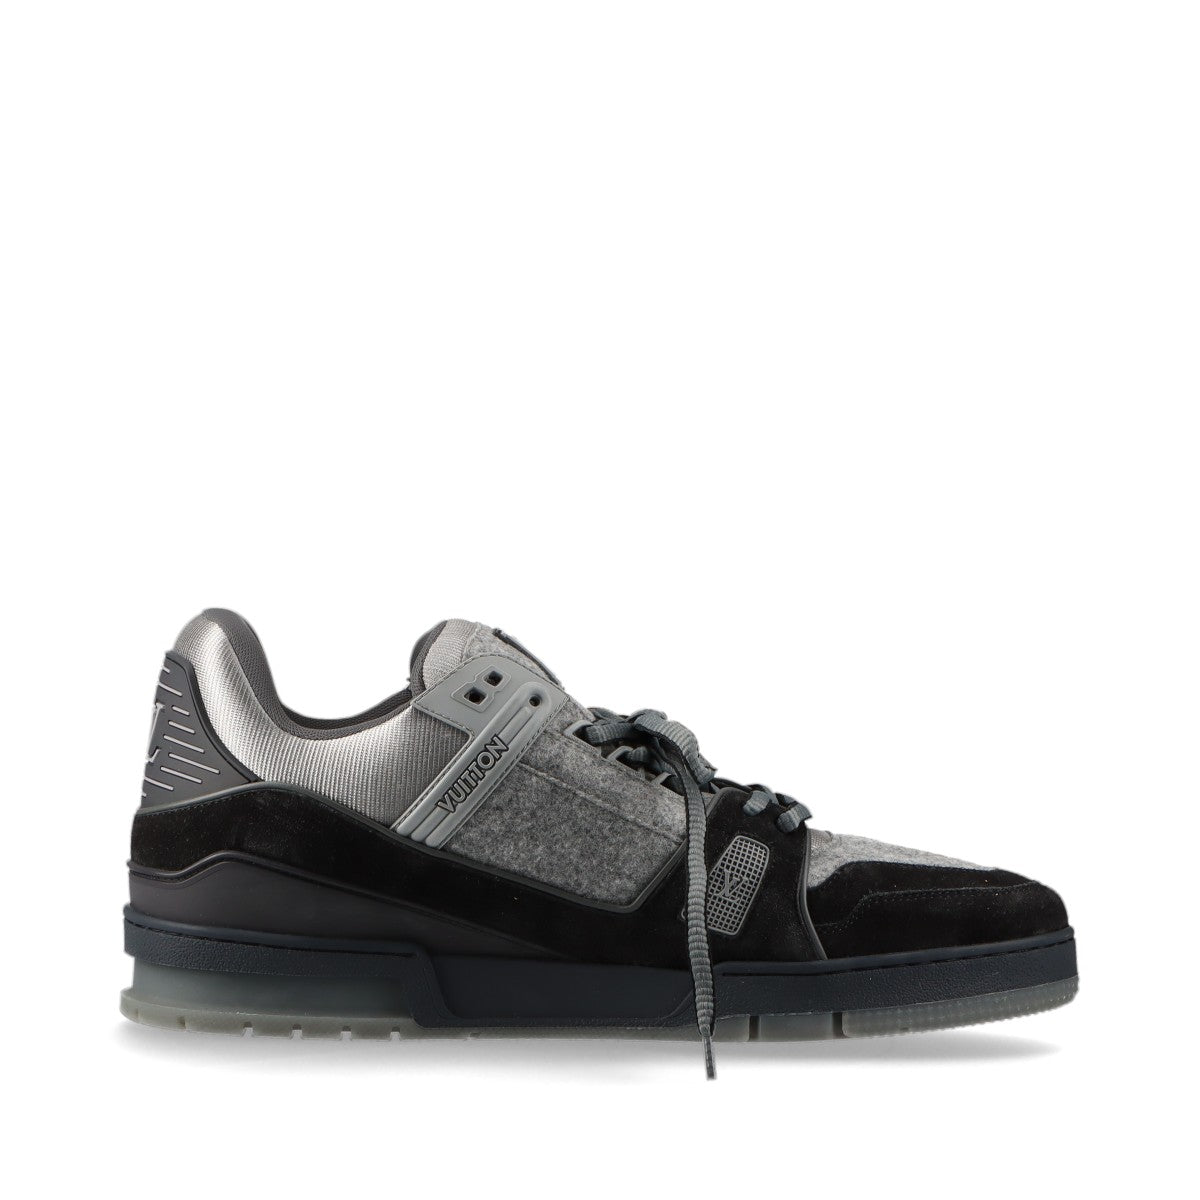 Louis Vuitton LV Trainer Line 19-year Wool & leather Sneakers UK11 Men's Black x Gray NV0159 LV Logo